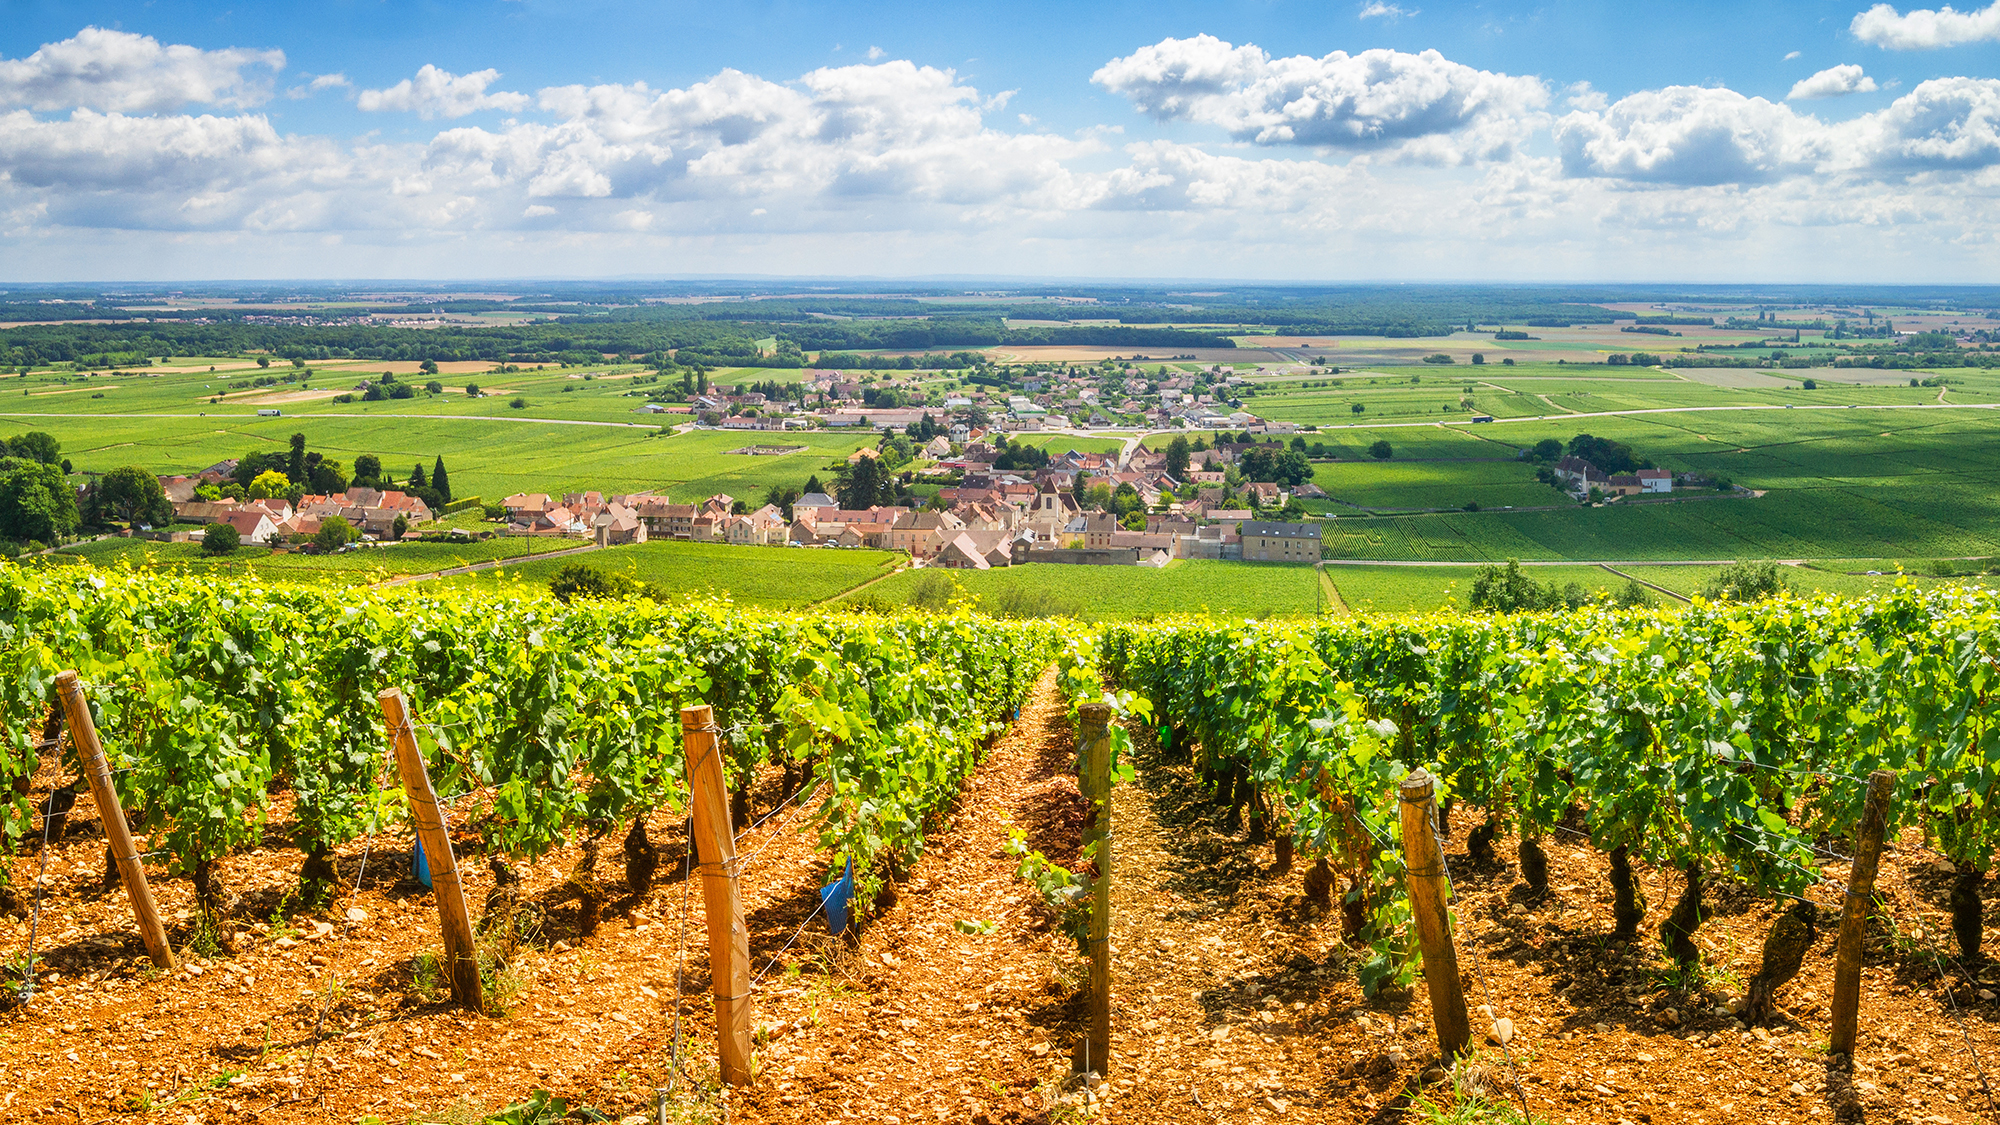 Vineyards with stretch of French countryside below under blue skies